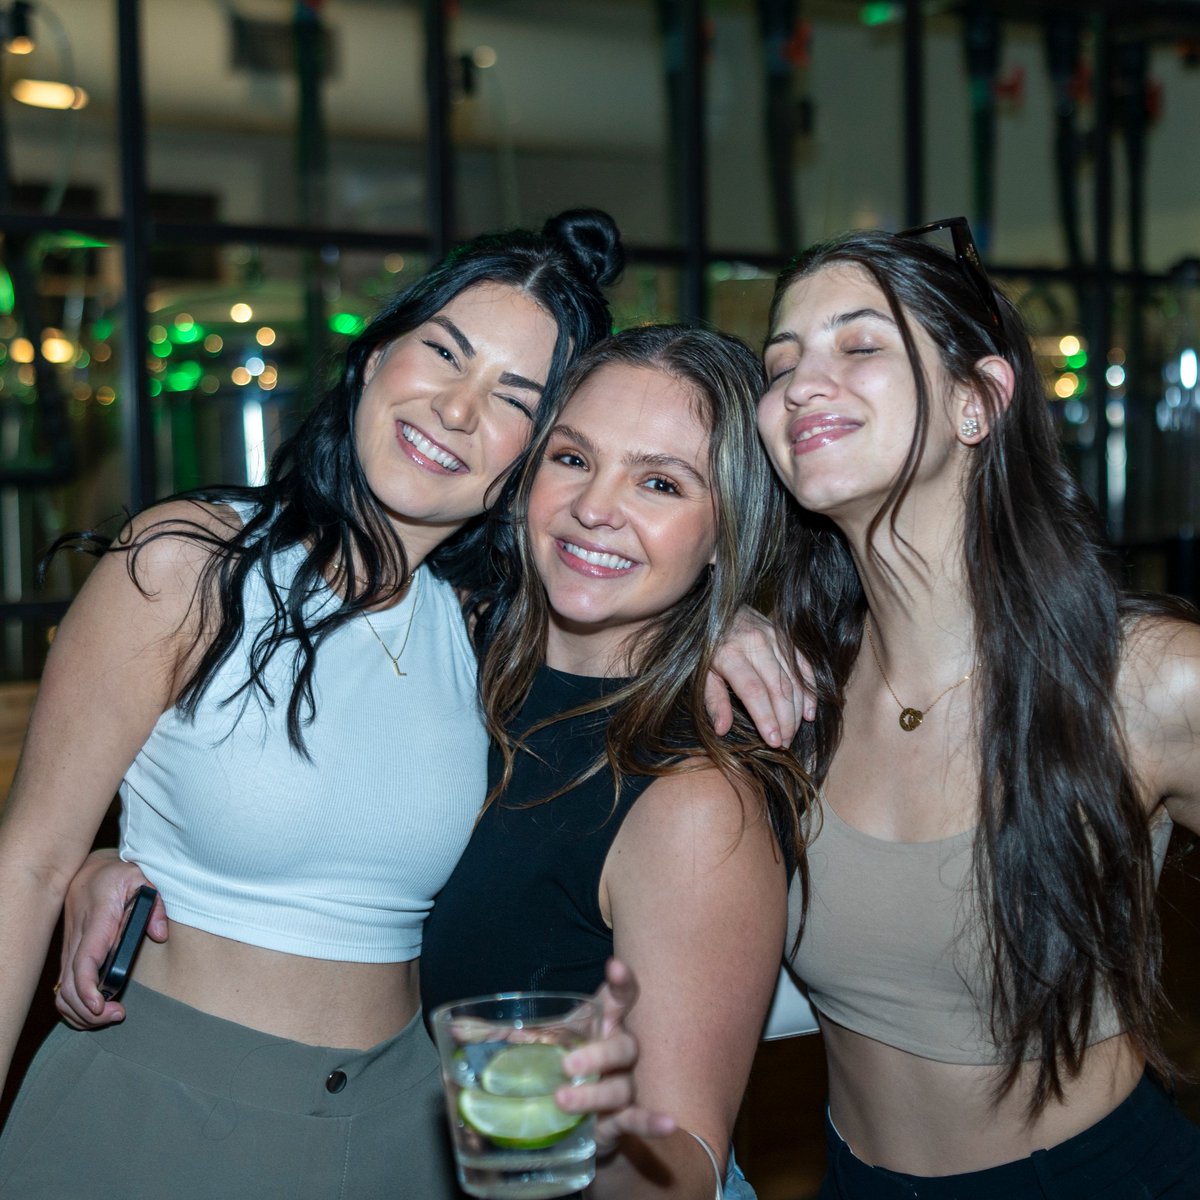 🍺🍷🥃 It's Ladies' Night! and complimentary beer, wine, and spirits are calling your name! 🎉 See you at 7 pm! #thingstodoinmiami #thingstodoindowntownmiami #HappyHourMiami #brickellliving #downtownmiami #thingstodoinbrickell